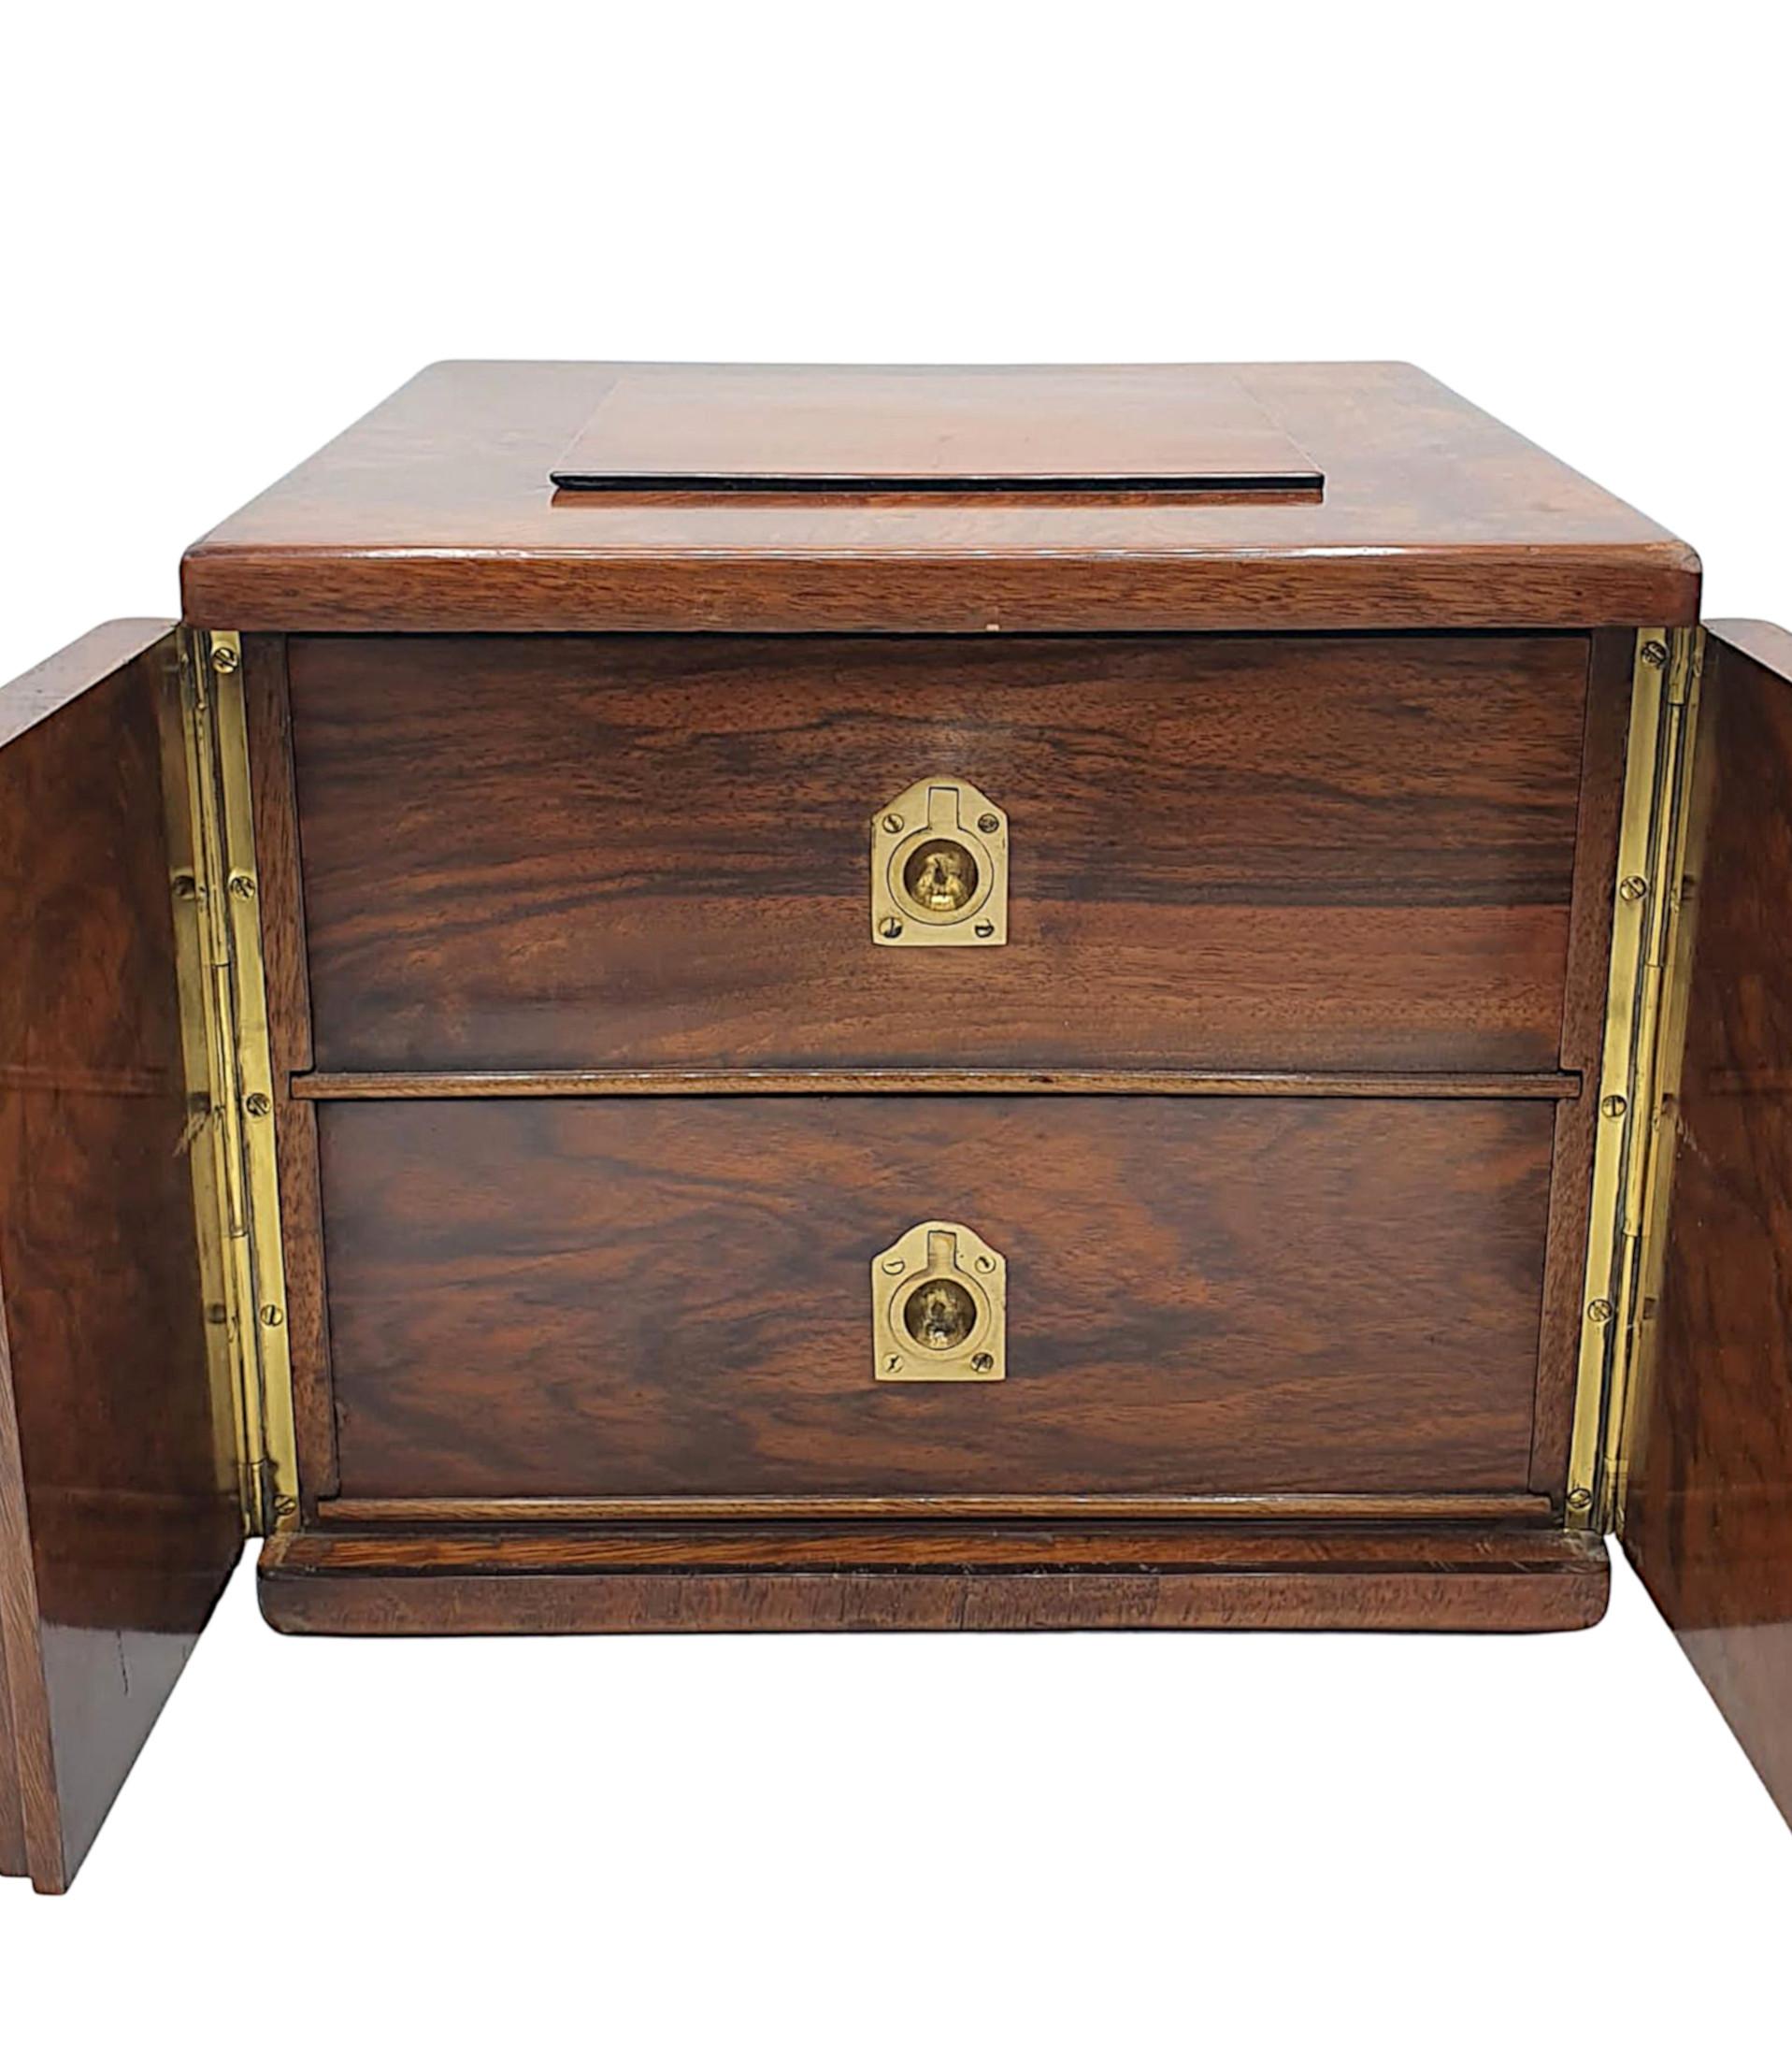 A very fine 19th century burr walnut cigar box of square form, the moulded top raised over a pair of brass hinged doors opening to reveal two cockbeaded drawers with fitted interiors and mounted with flush brass pulls. The sides of cigar box also